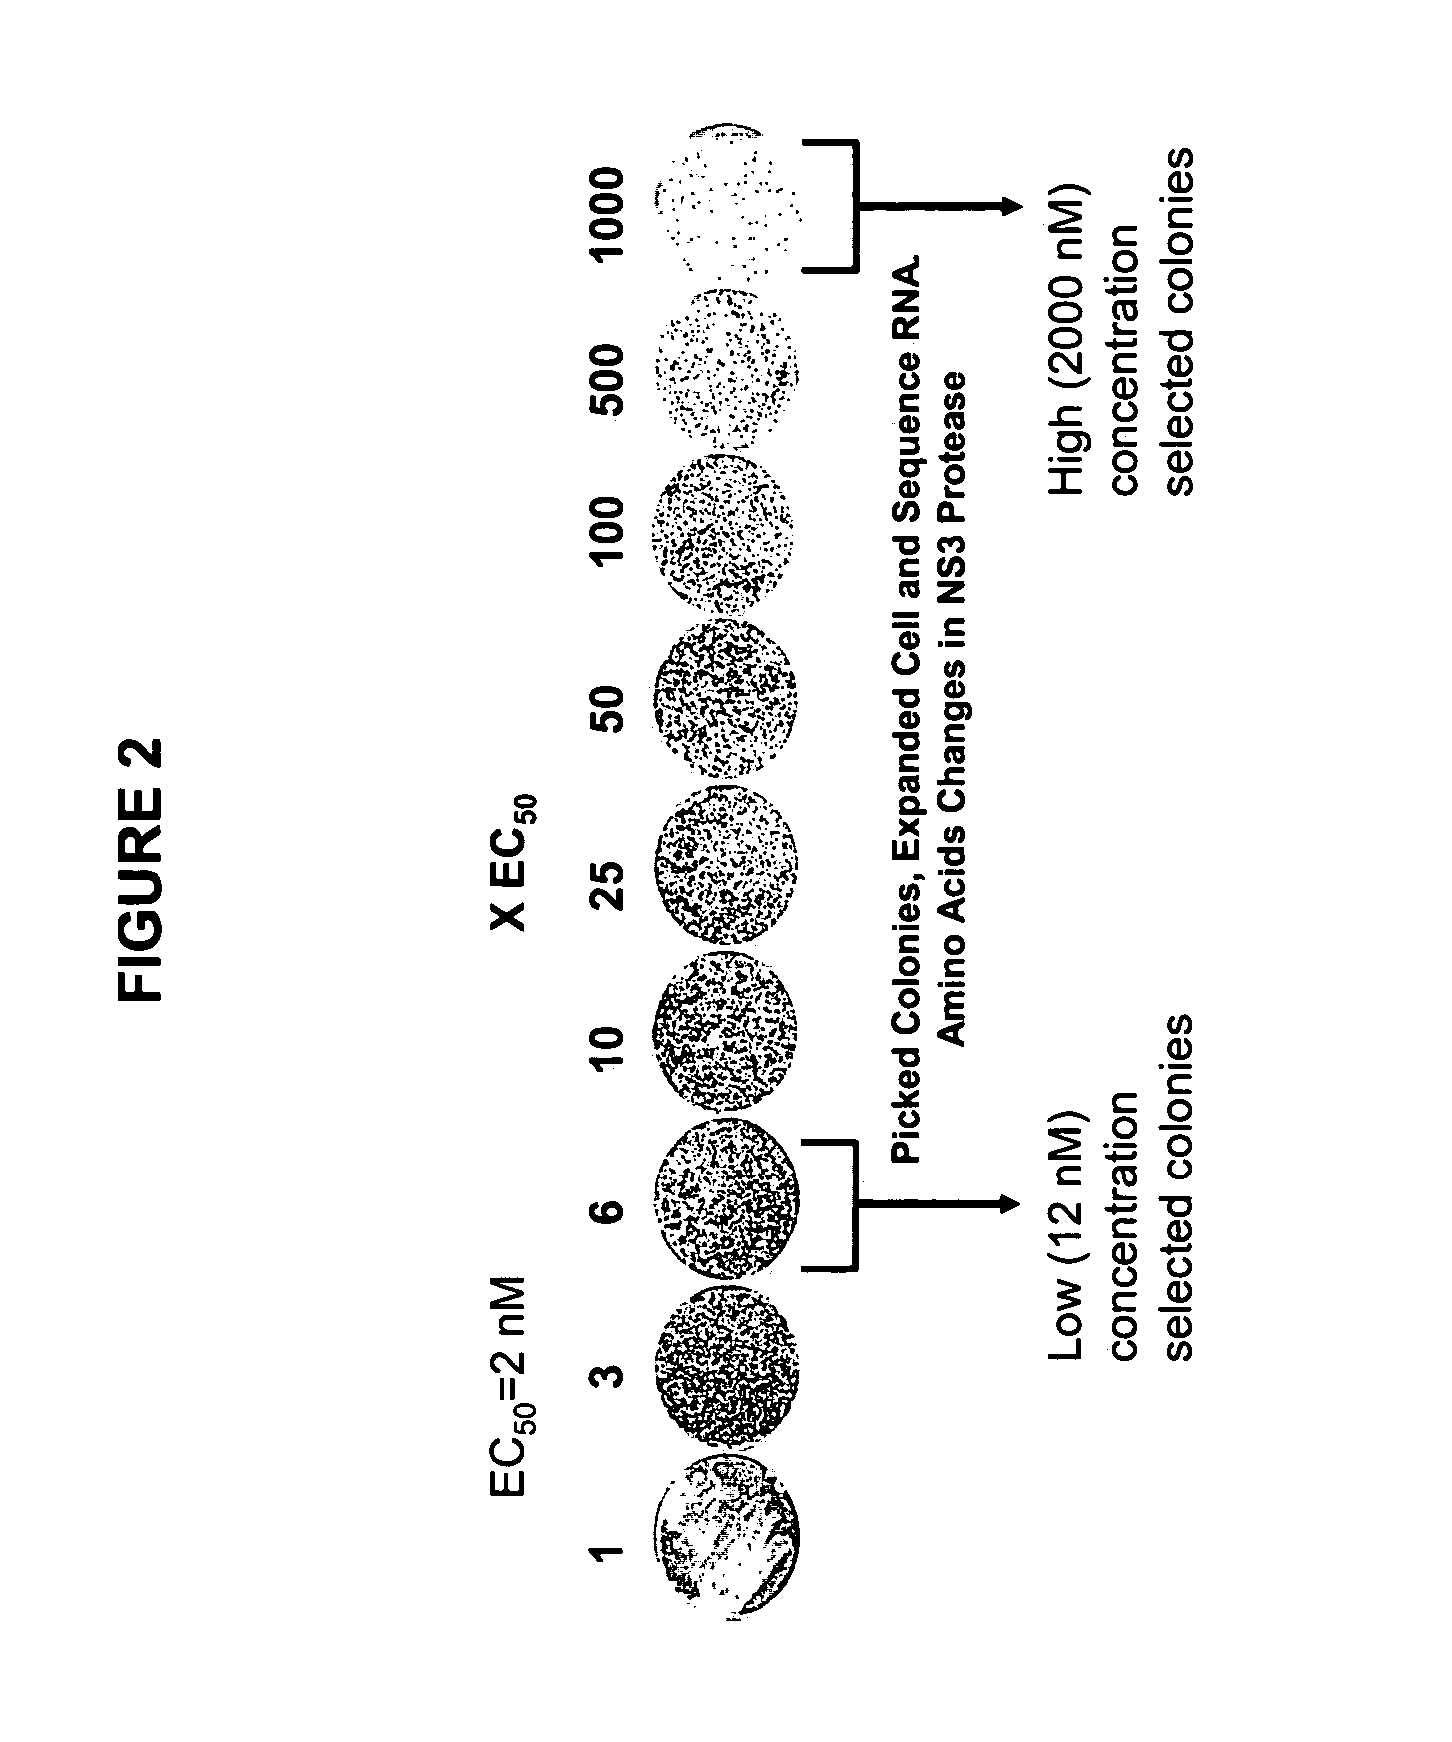 Inhibitor-resistant HCV NS3 protease